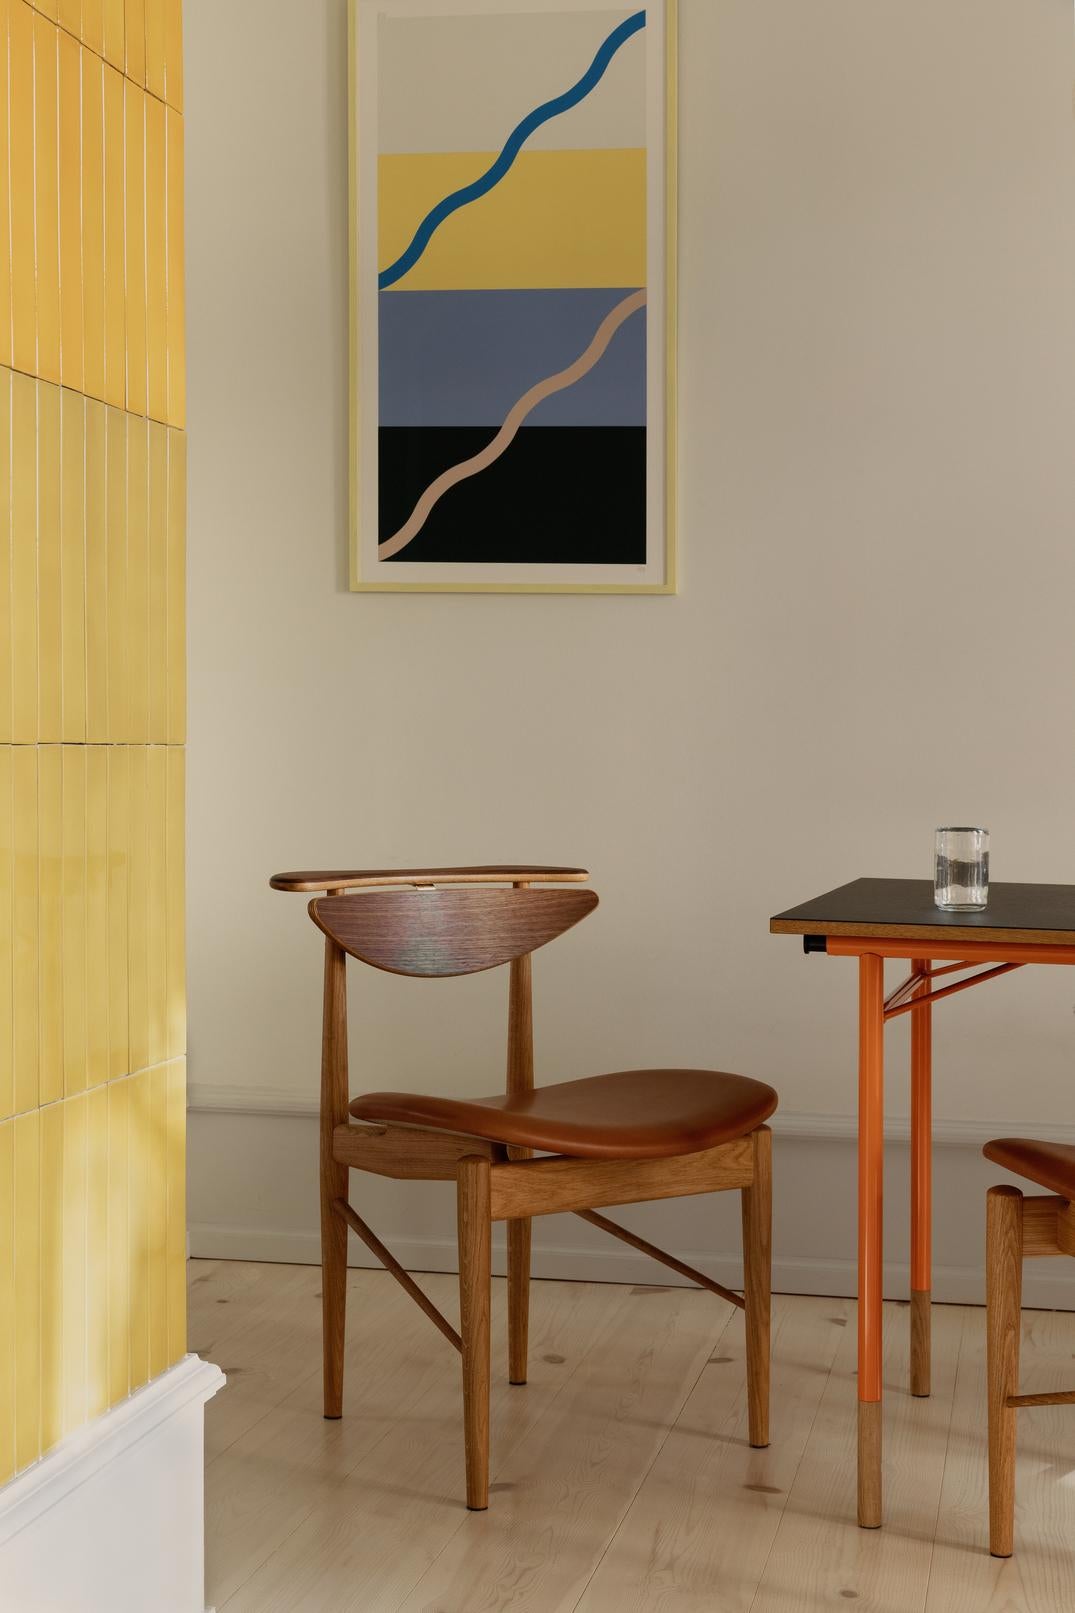 Armchair designed by Finn Juhl in 1953, relaunched in 2015.
Manufactured by House of Finn Juhl in Denmark.

In 1953, Finn Juhl designed this simple yet elegant dining chair for the furniture manufacturer Bovirke, which we have relaunched under